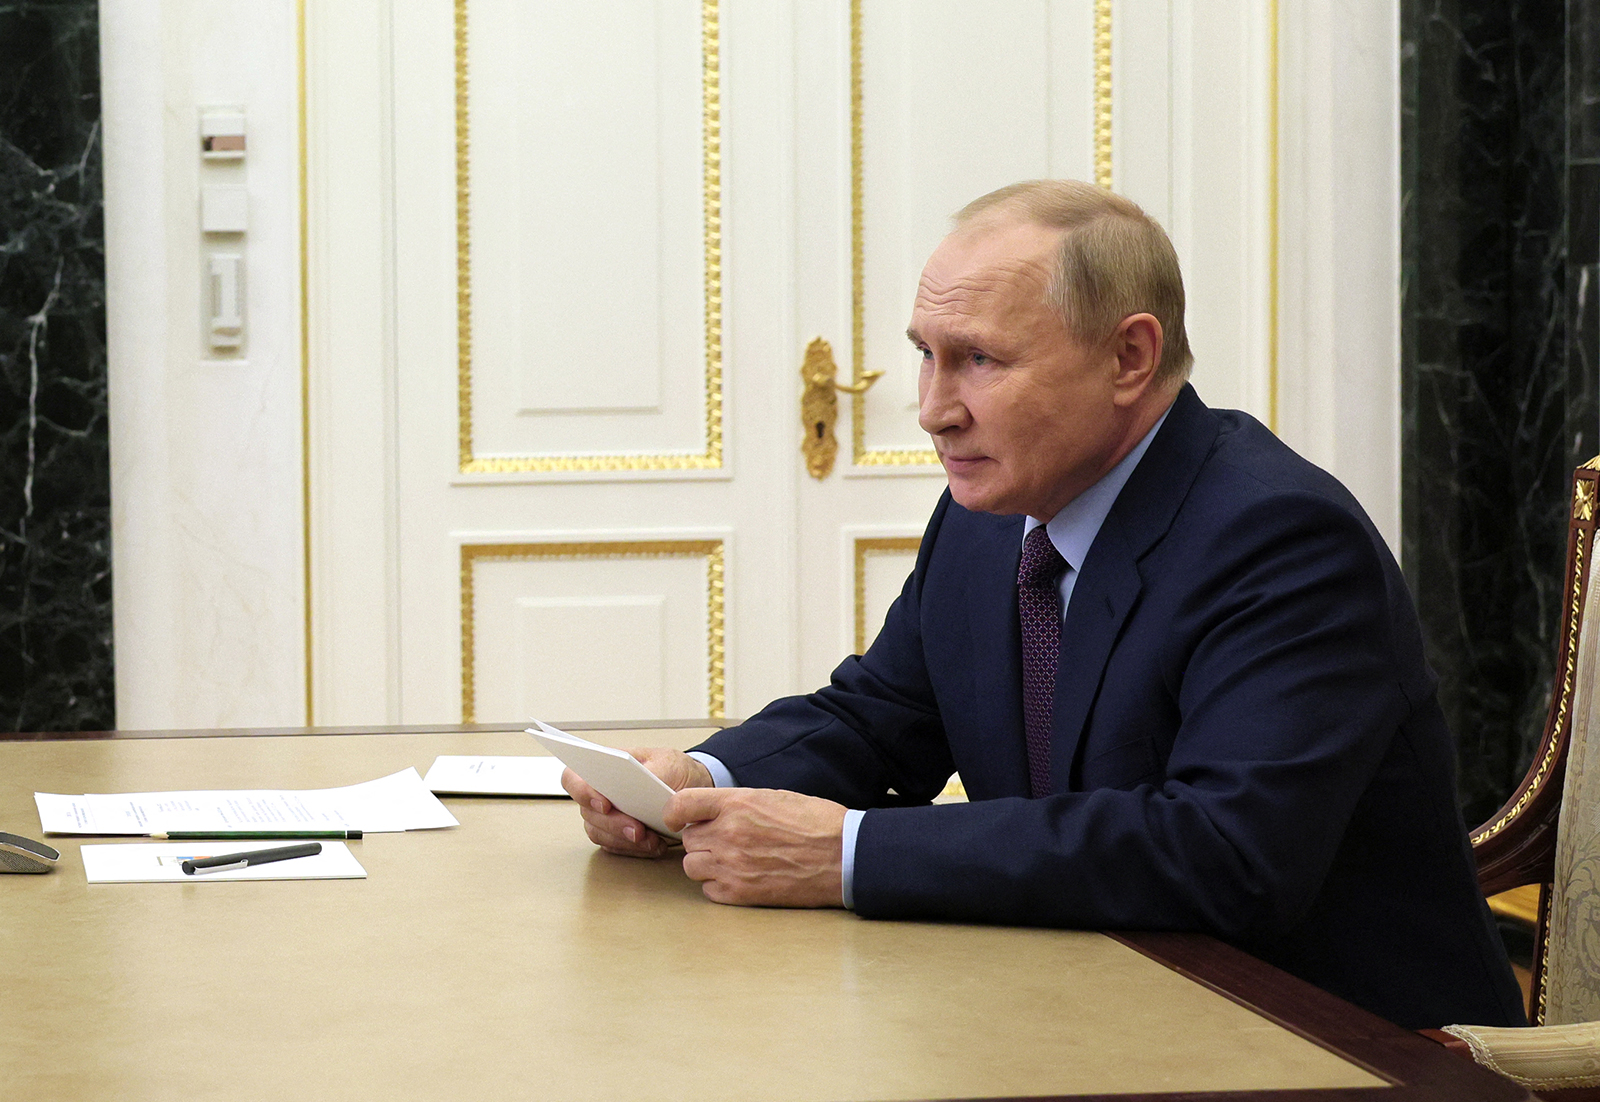 Russian President Vladimir Putin chairs a meeting on economic issues via a video link at the Kremlin in Moscow on Monday.